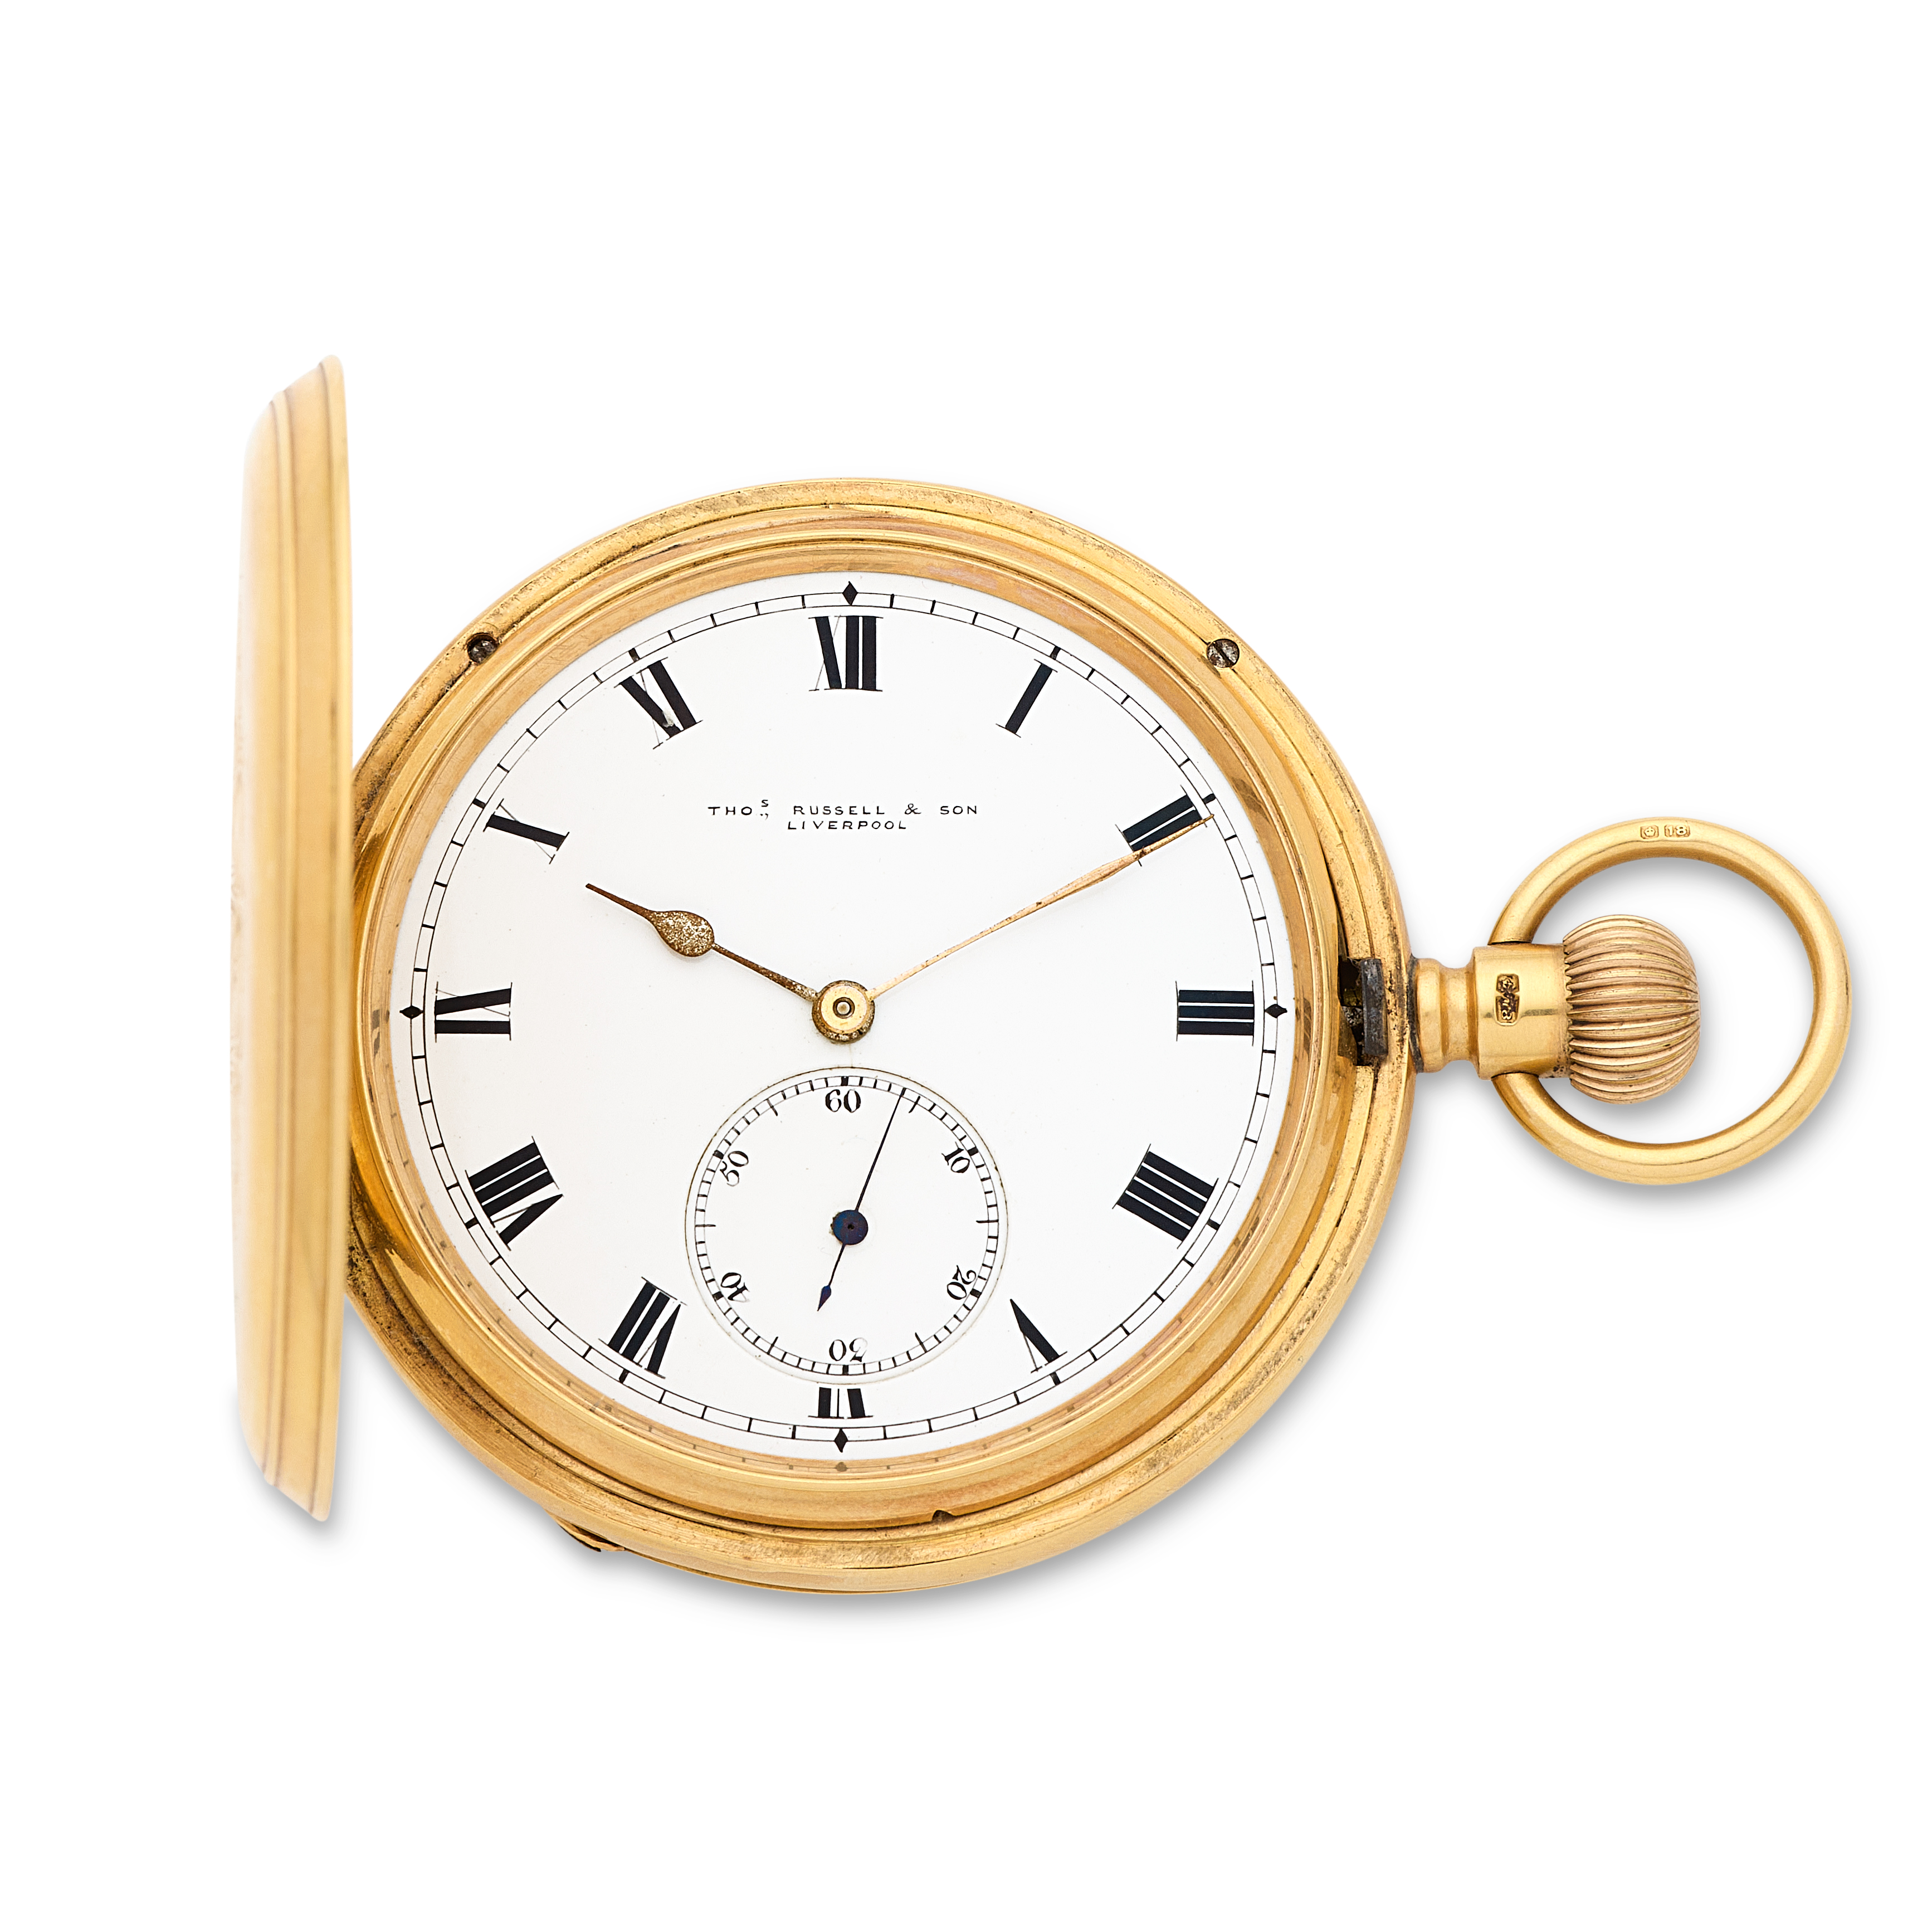 Thomas Russell & Son, Liverpool. An 18K gold keyless wind full hunter pocket watch with presenta...